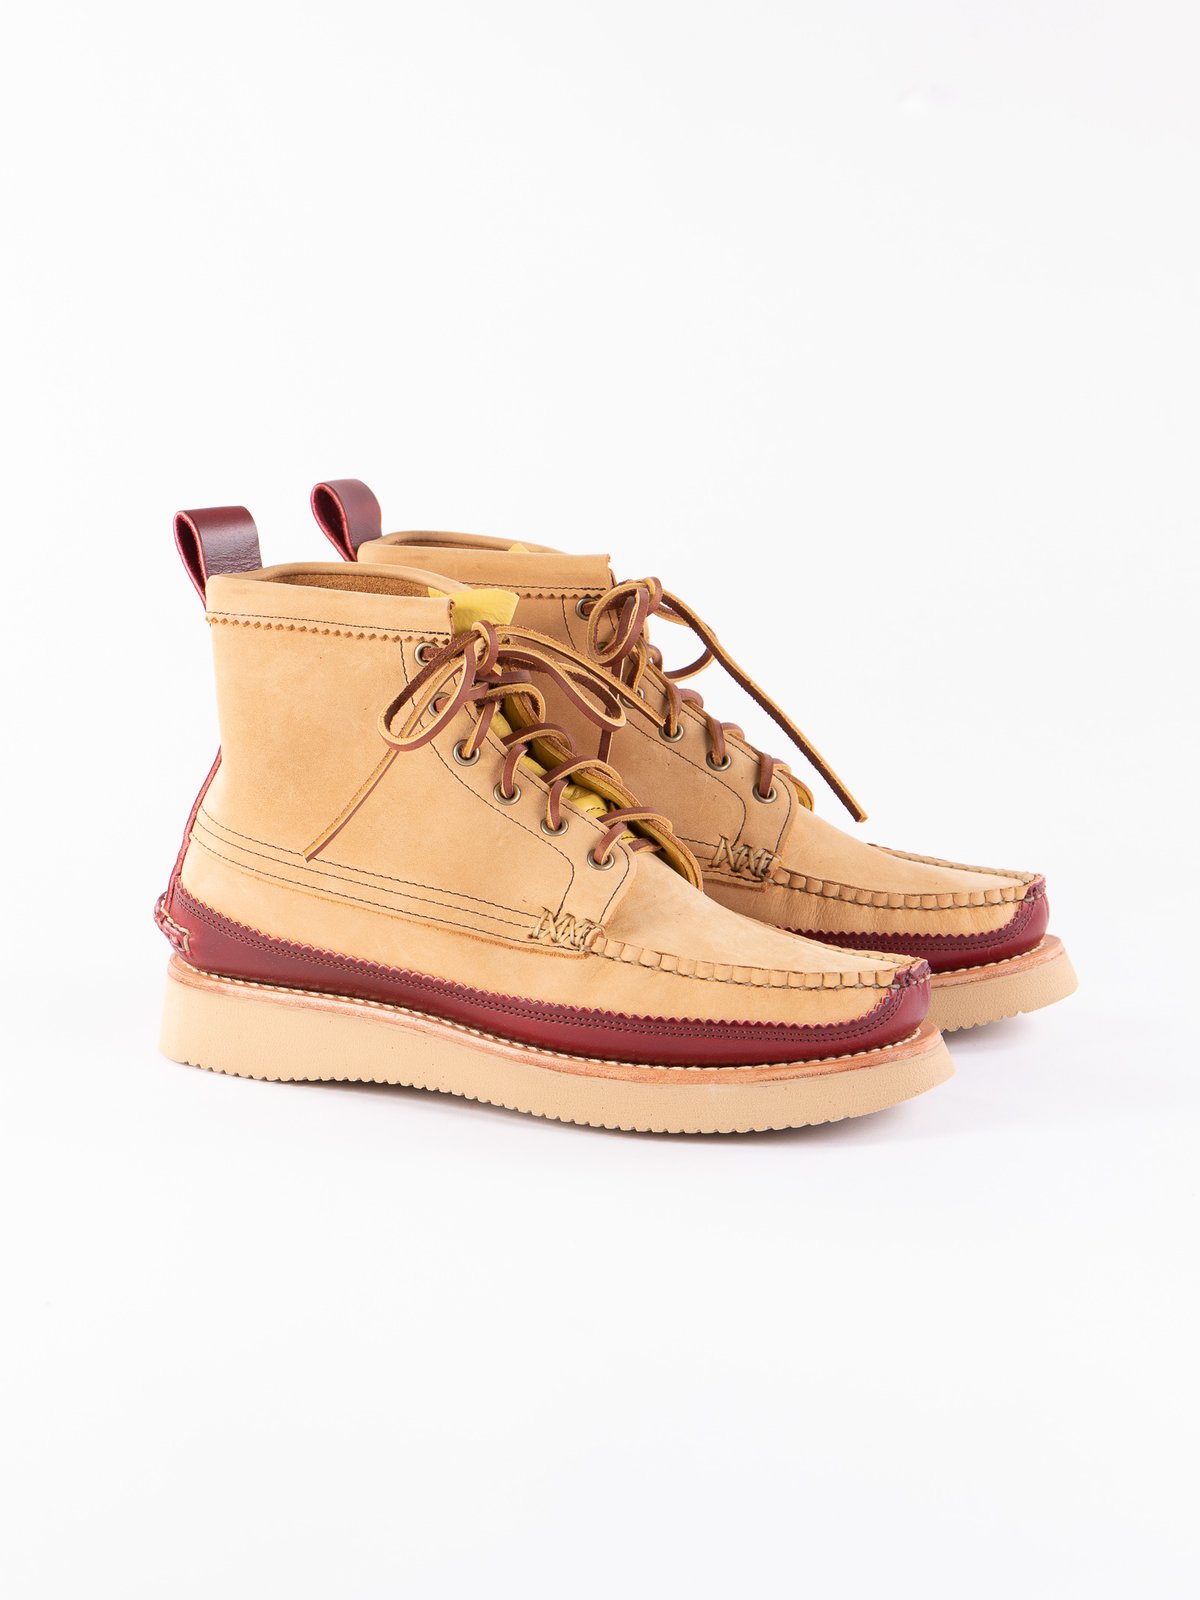 DB Brown x C Red Maine Guide 6 Eye DB Boot Exclusive - Image 1